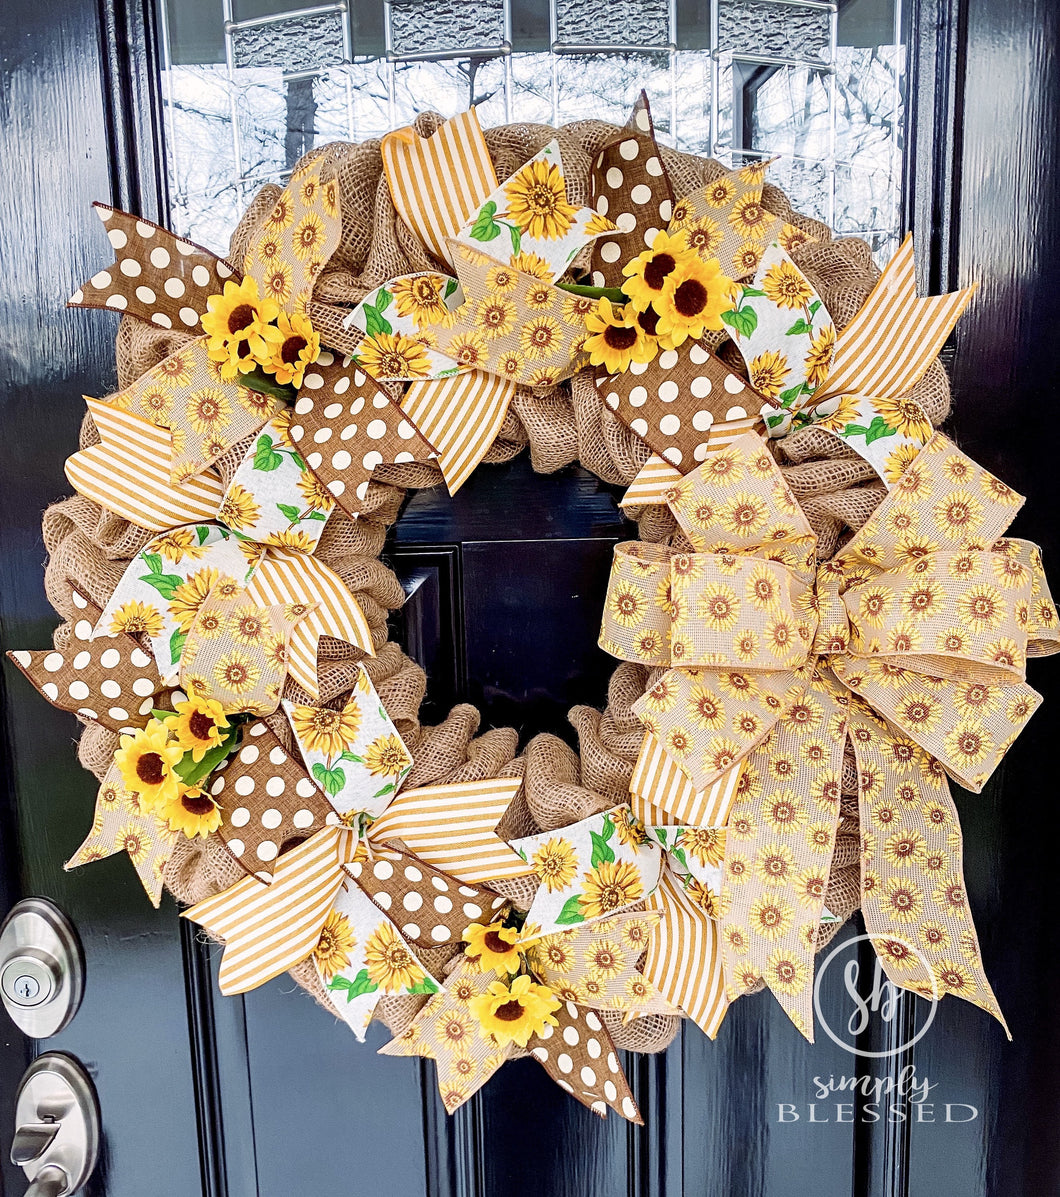 Sunflower Burlap Wreath - as seen in COUNTRY SAMPLER magazine - Simply Blessed